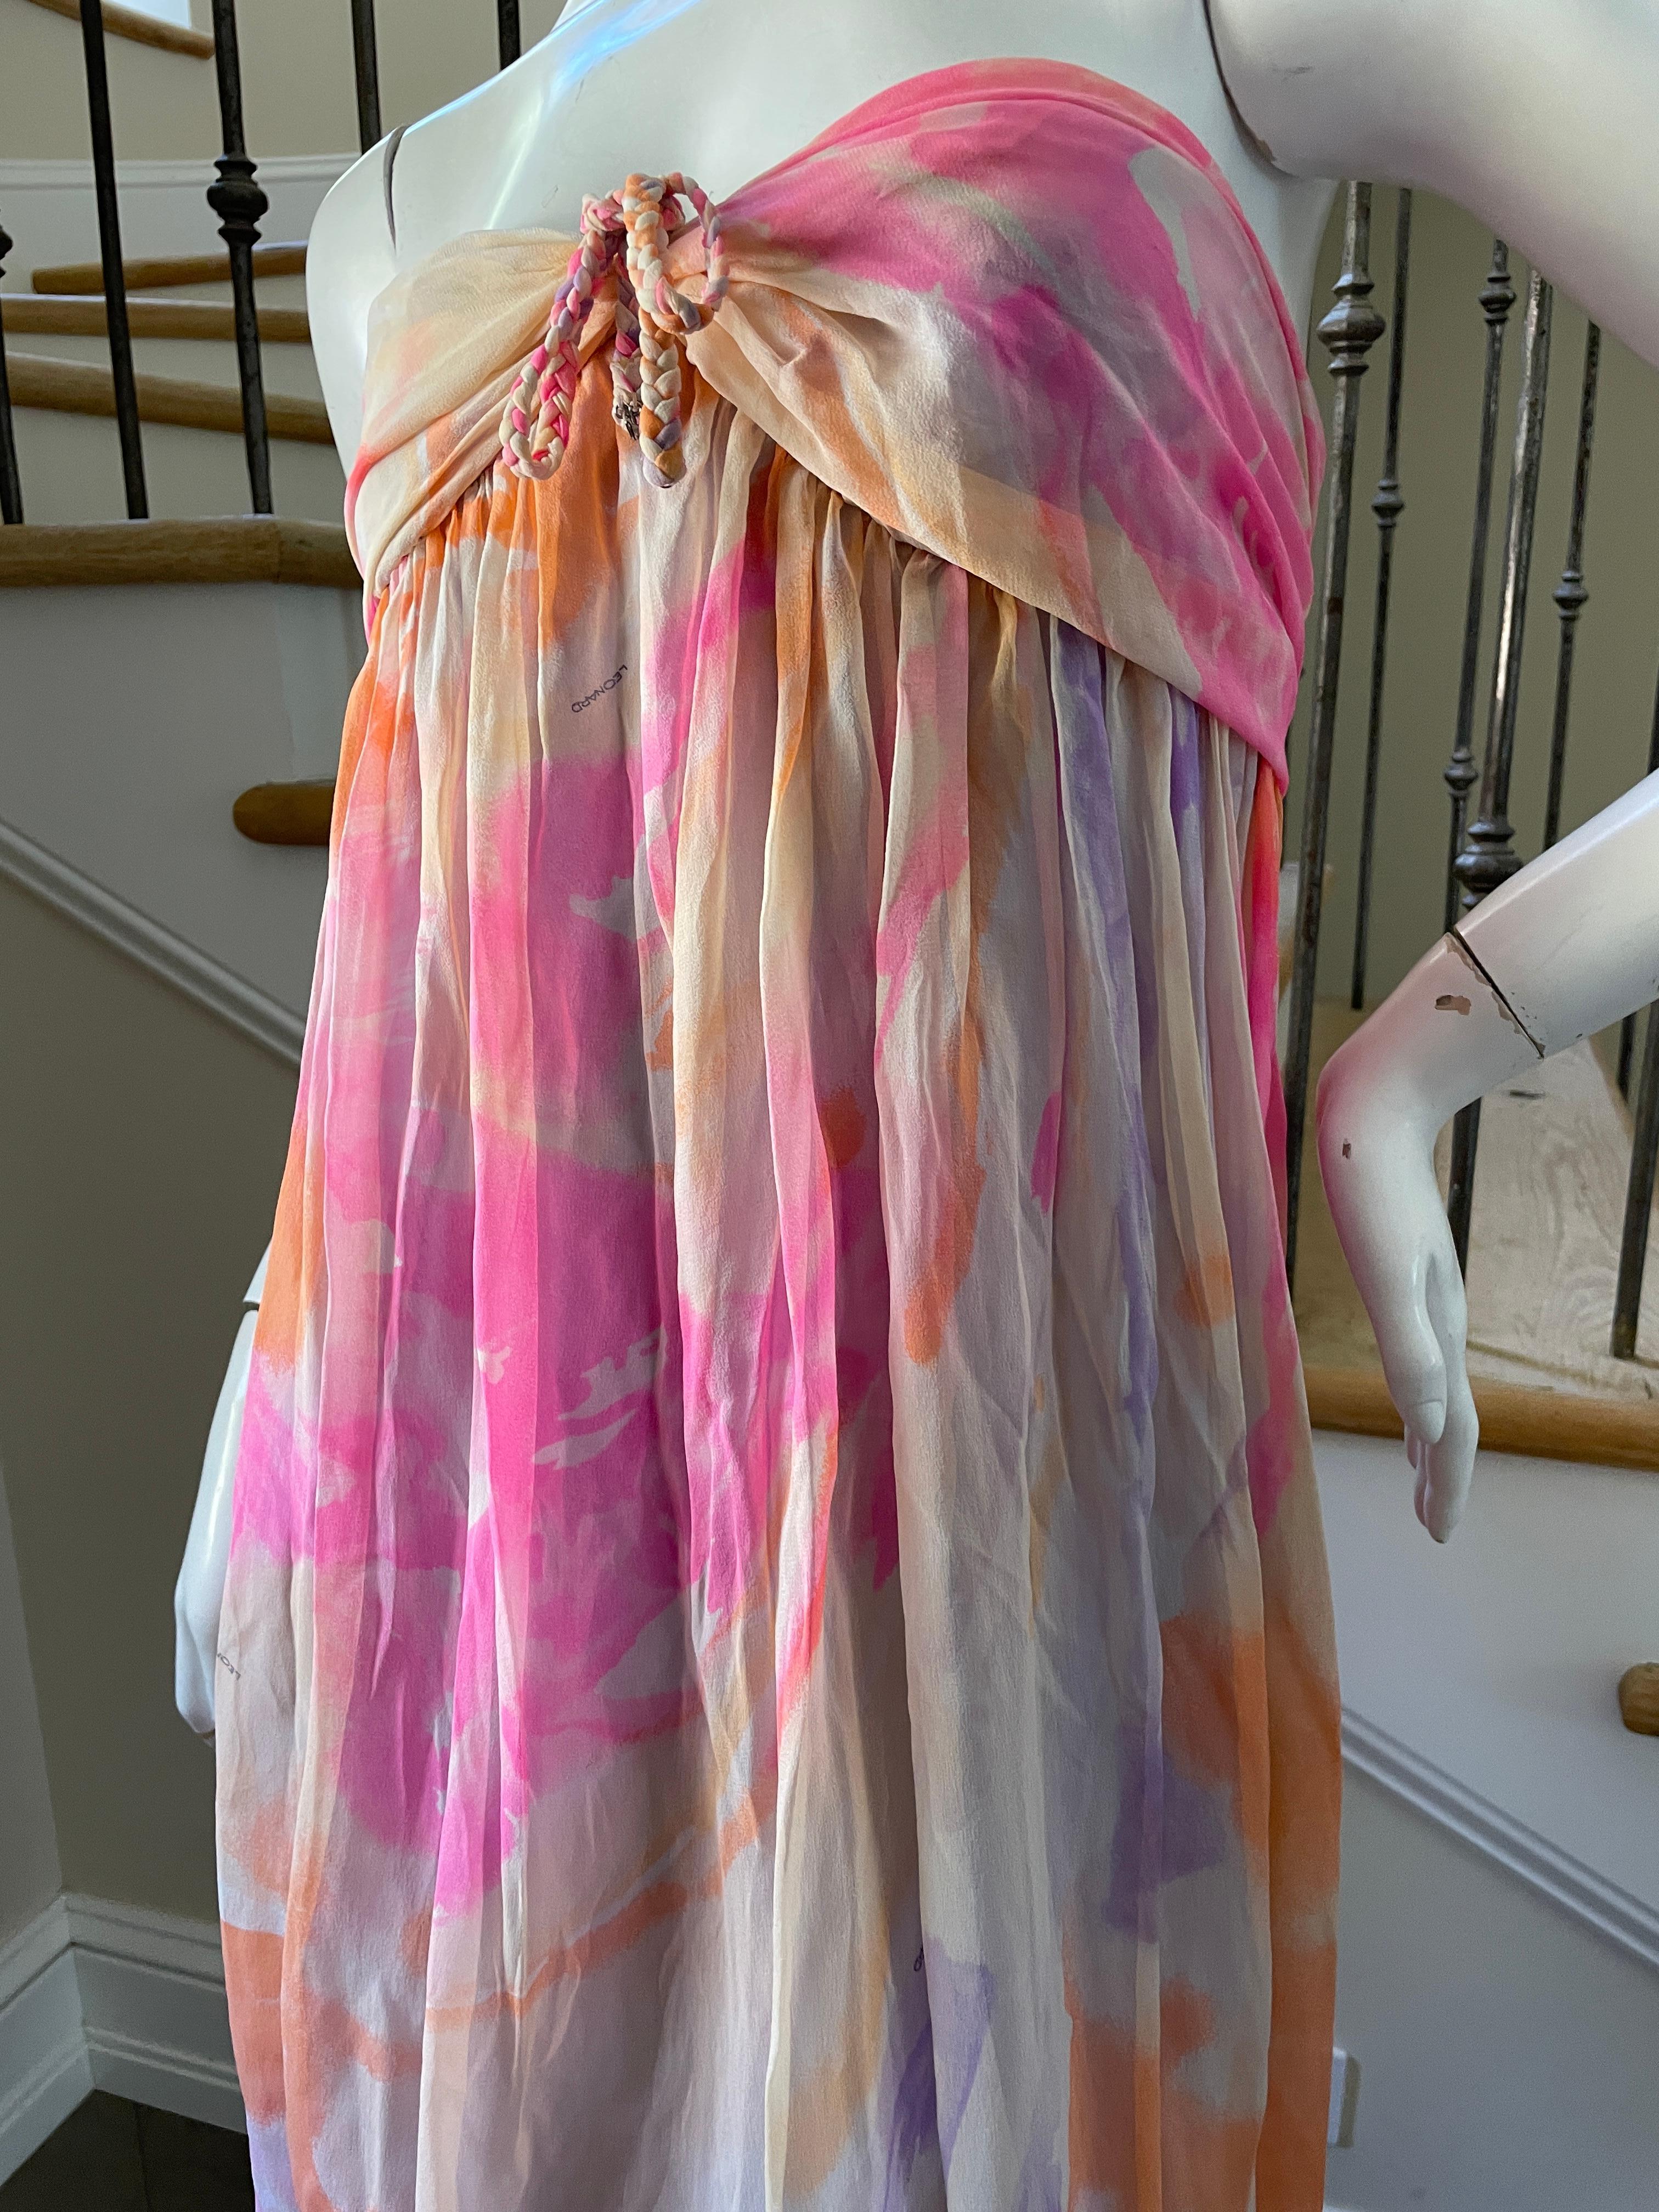 Leonard Paris Silk Chiffon Vintage Strapless Long Pastel Floral Dress 
So pretty, please use the zoom lens to see details.
Leonard Paris was a contemporary of Pucci, both houses creating brilliant 60's patterns on silk jersey.
Both were very